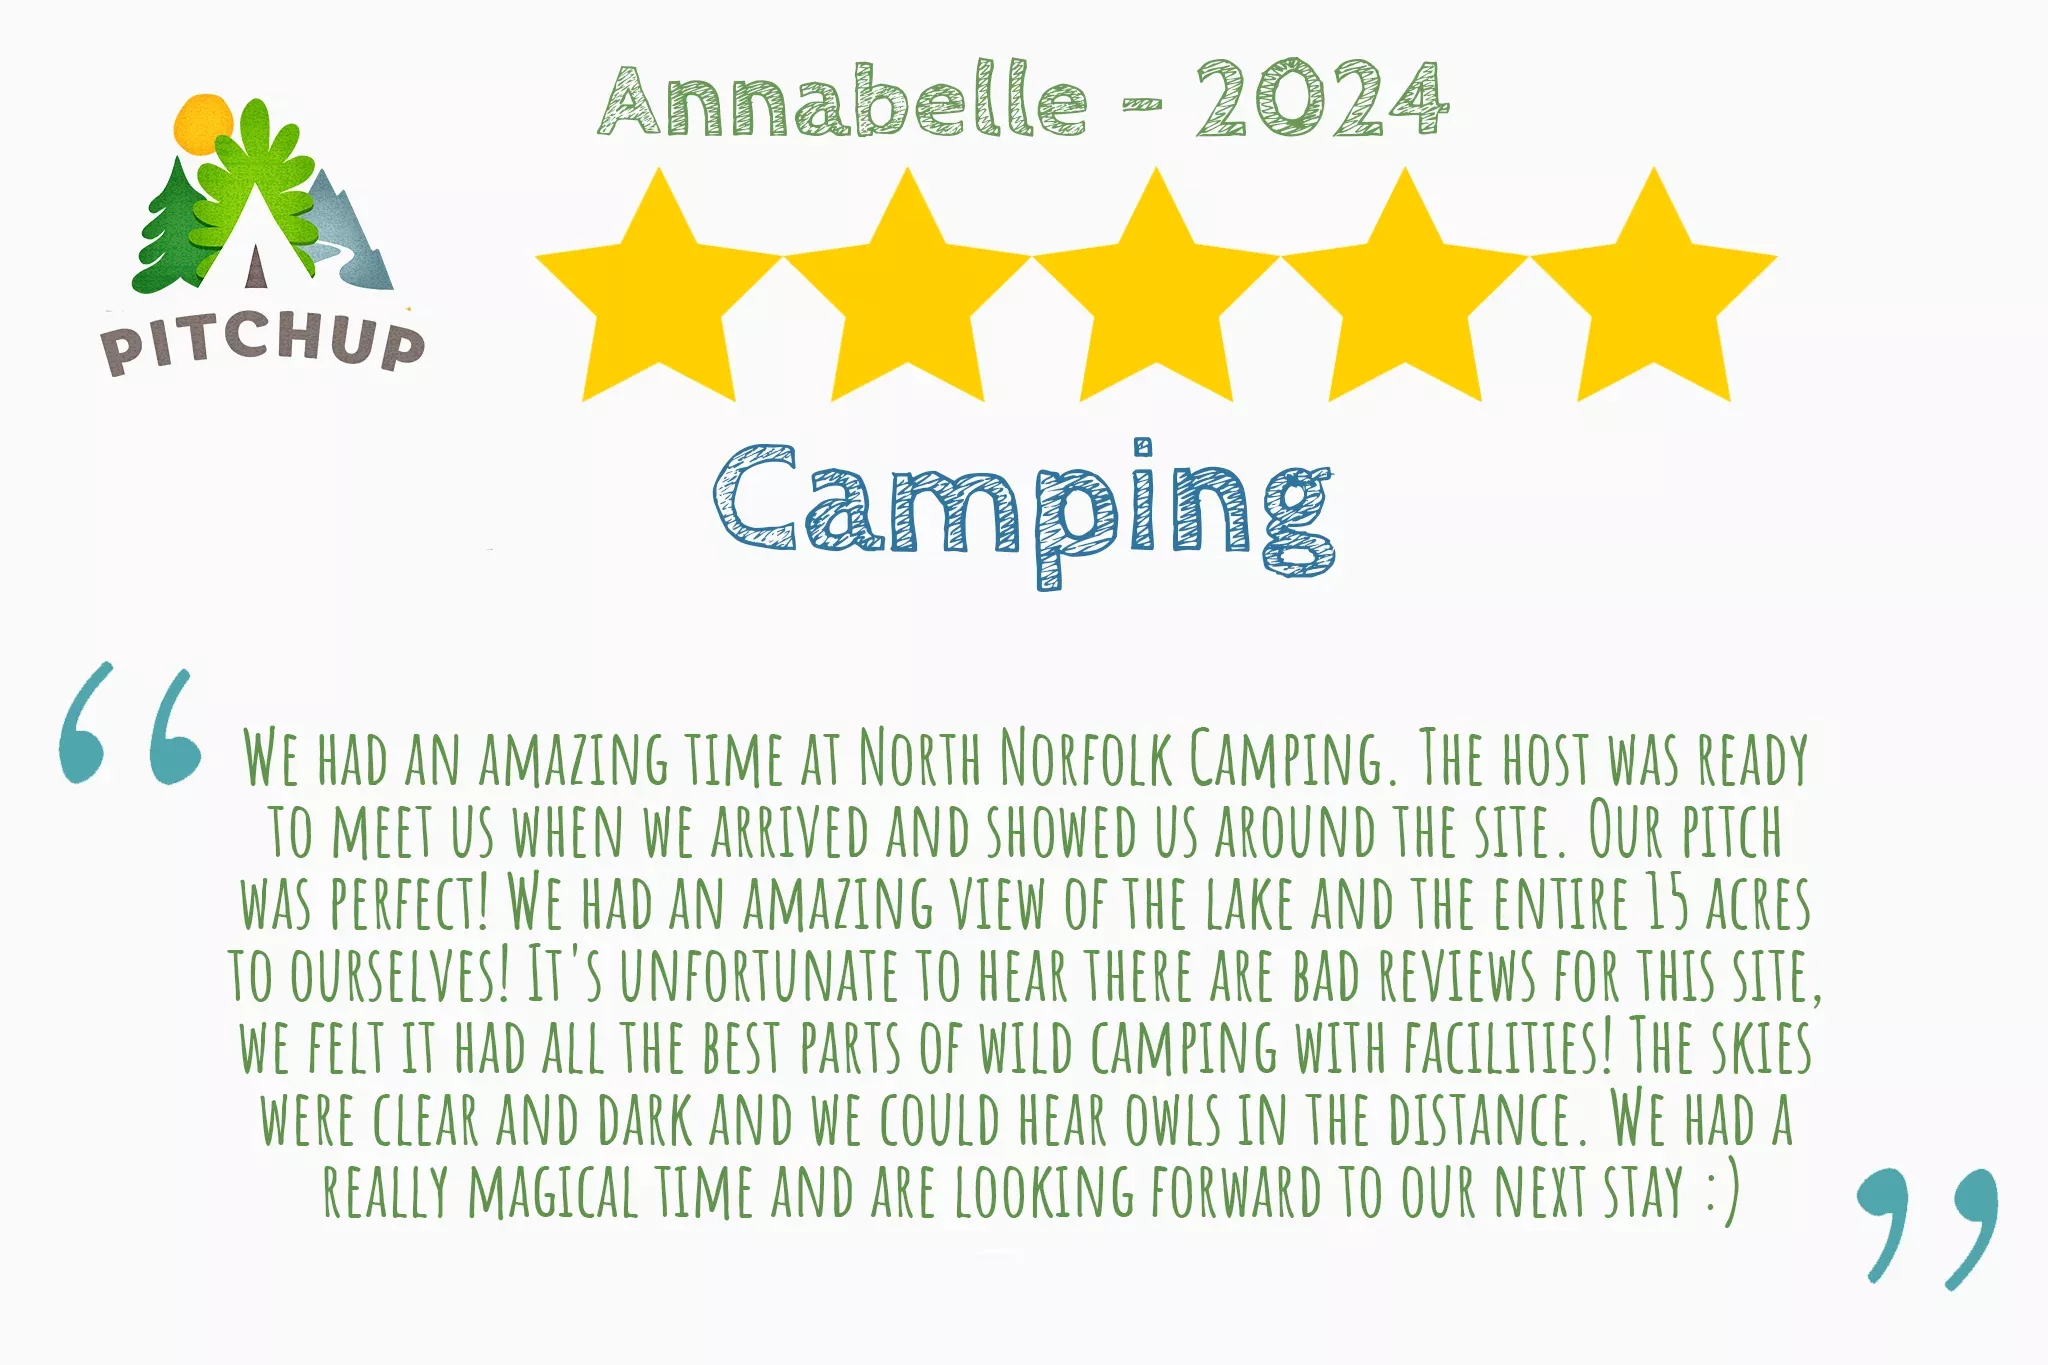 Recommended review from Annabelle on PitchUp that says "We had an amazing time at North Norfolk Camping. The host was ready to  meet us when we arrived and showed us around the site. Our pitch was  perfect! We had an amazing view of the lake and the entire 15 acres to  ourselves! The skies were clear and dark and we could hear owls in the  distance. We had a really magical time and are  looking forward to our next stay :)""